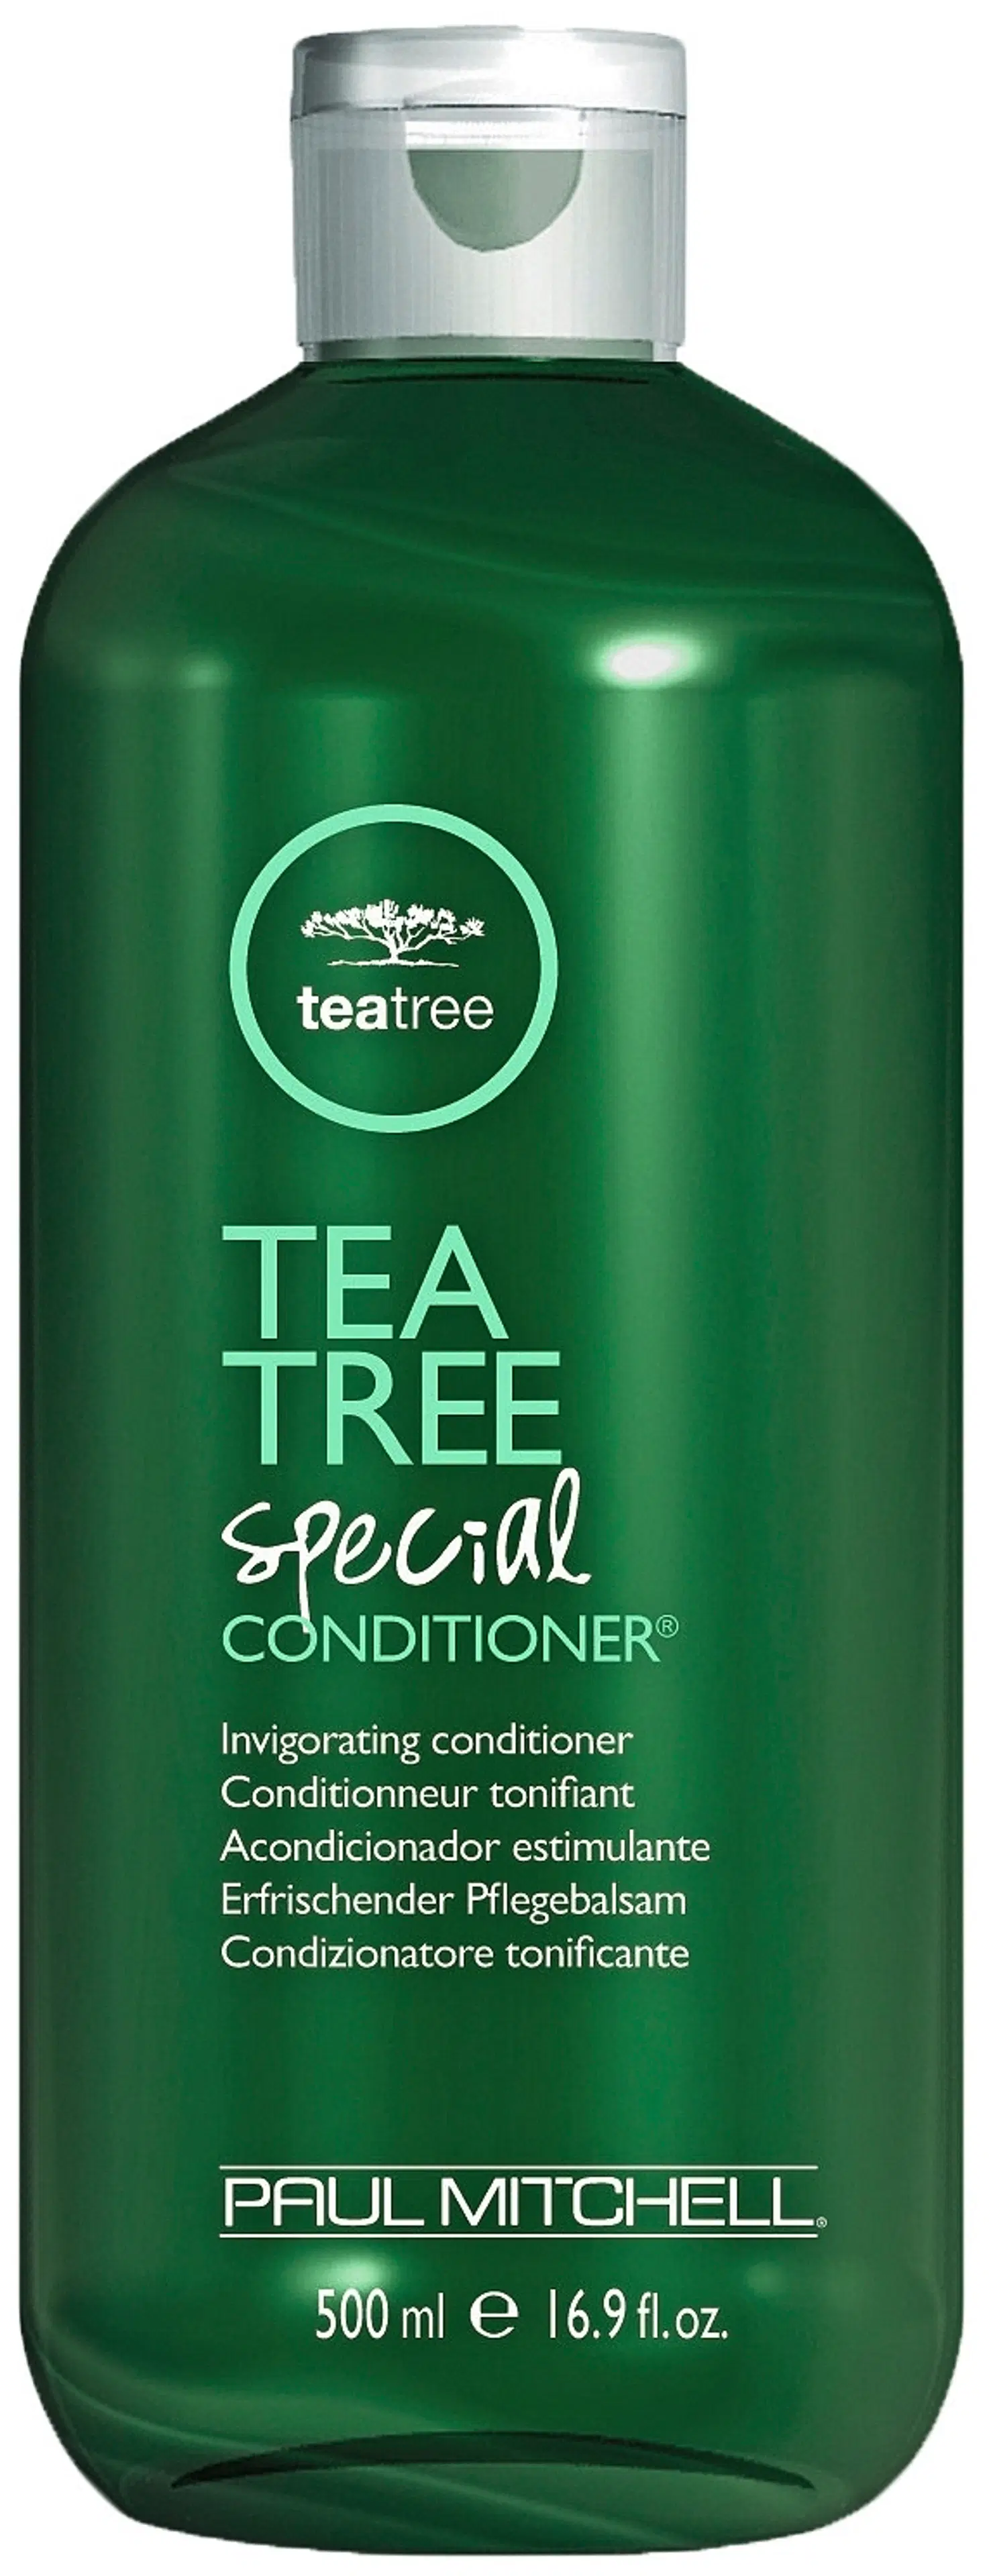 Paul Mitchell Tea Tree Special Conditioner hoitoaine 500 ml